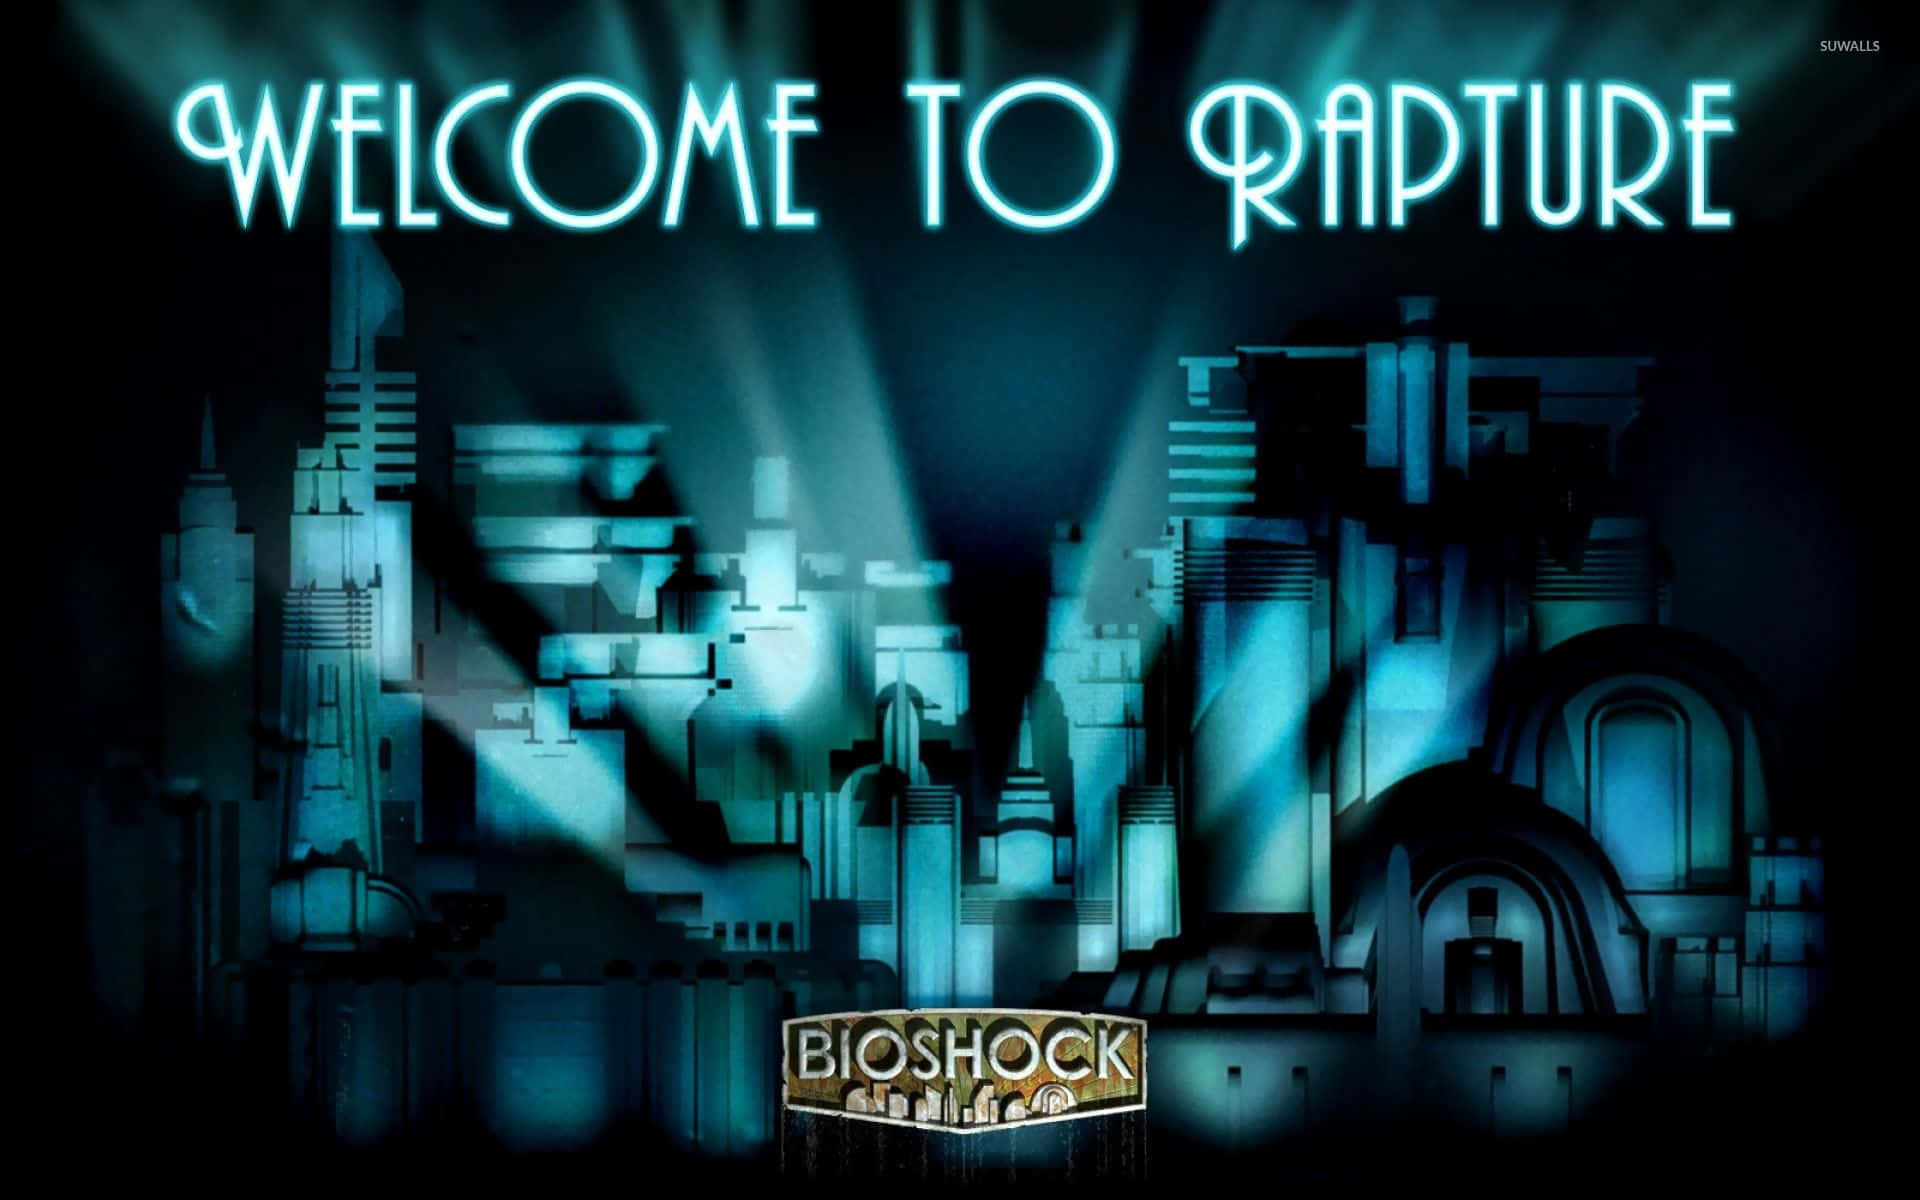 Behold! The magnificence of the world of Rapture. Wallpaper